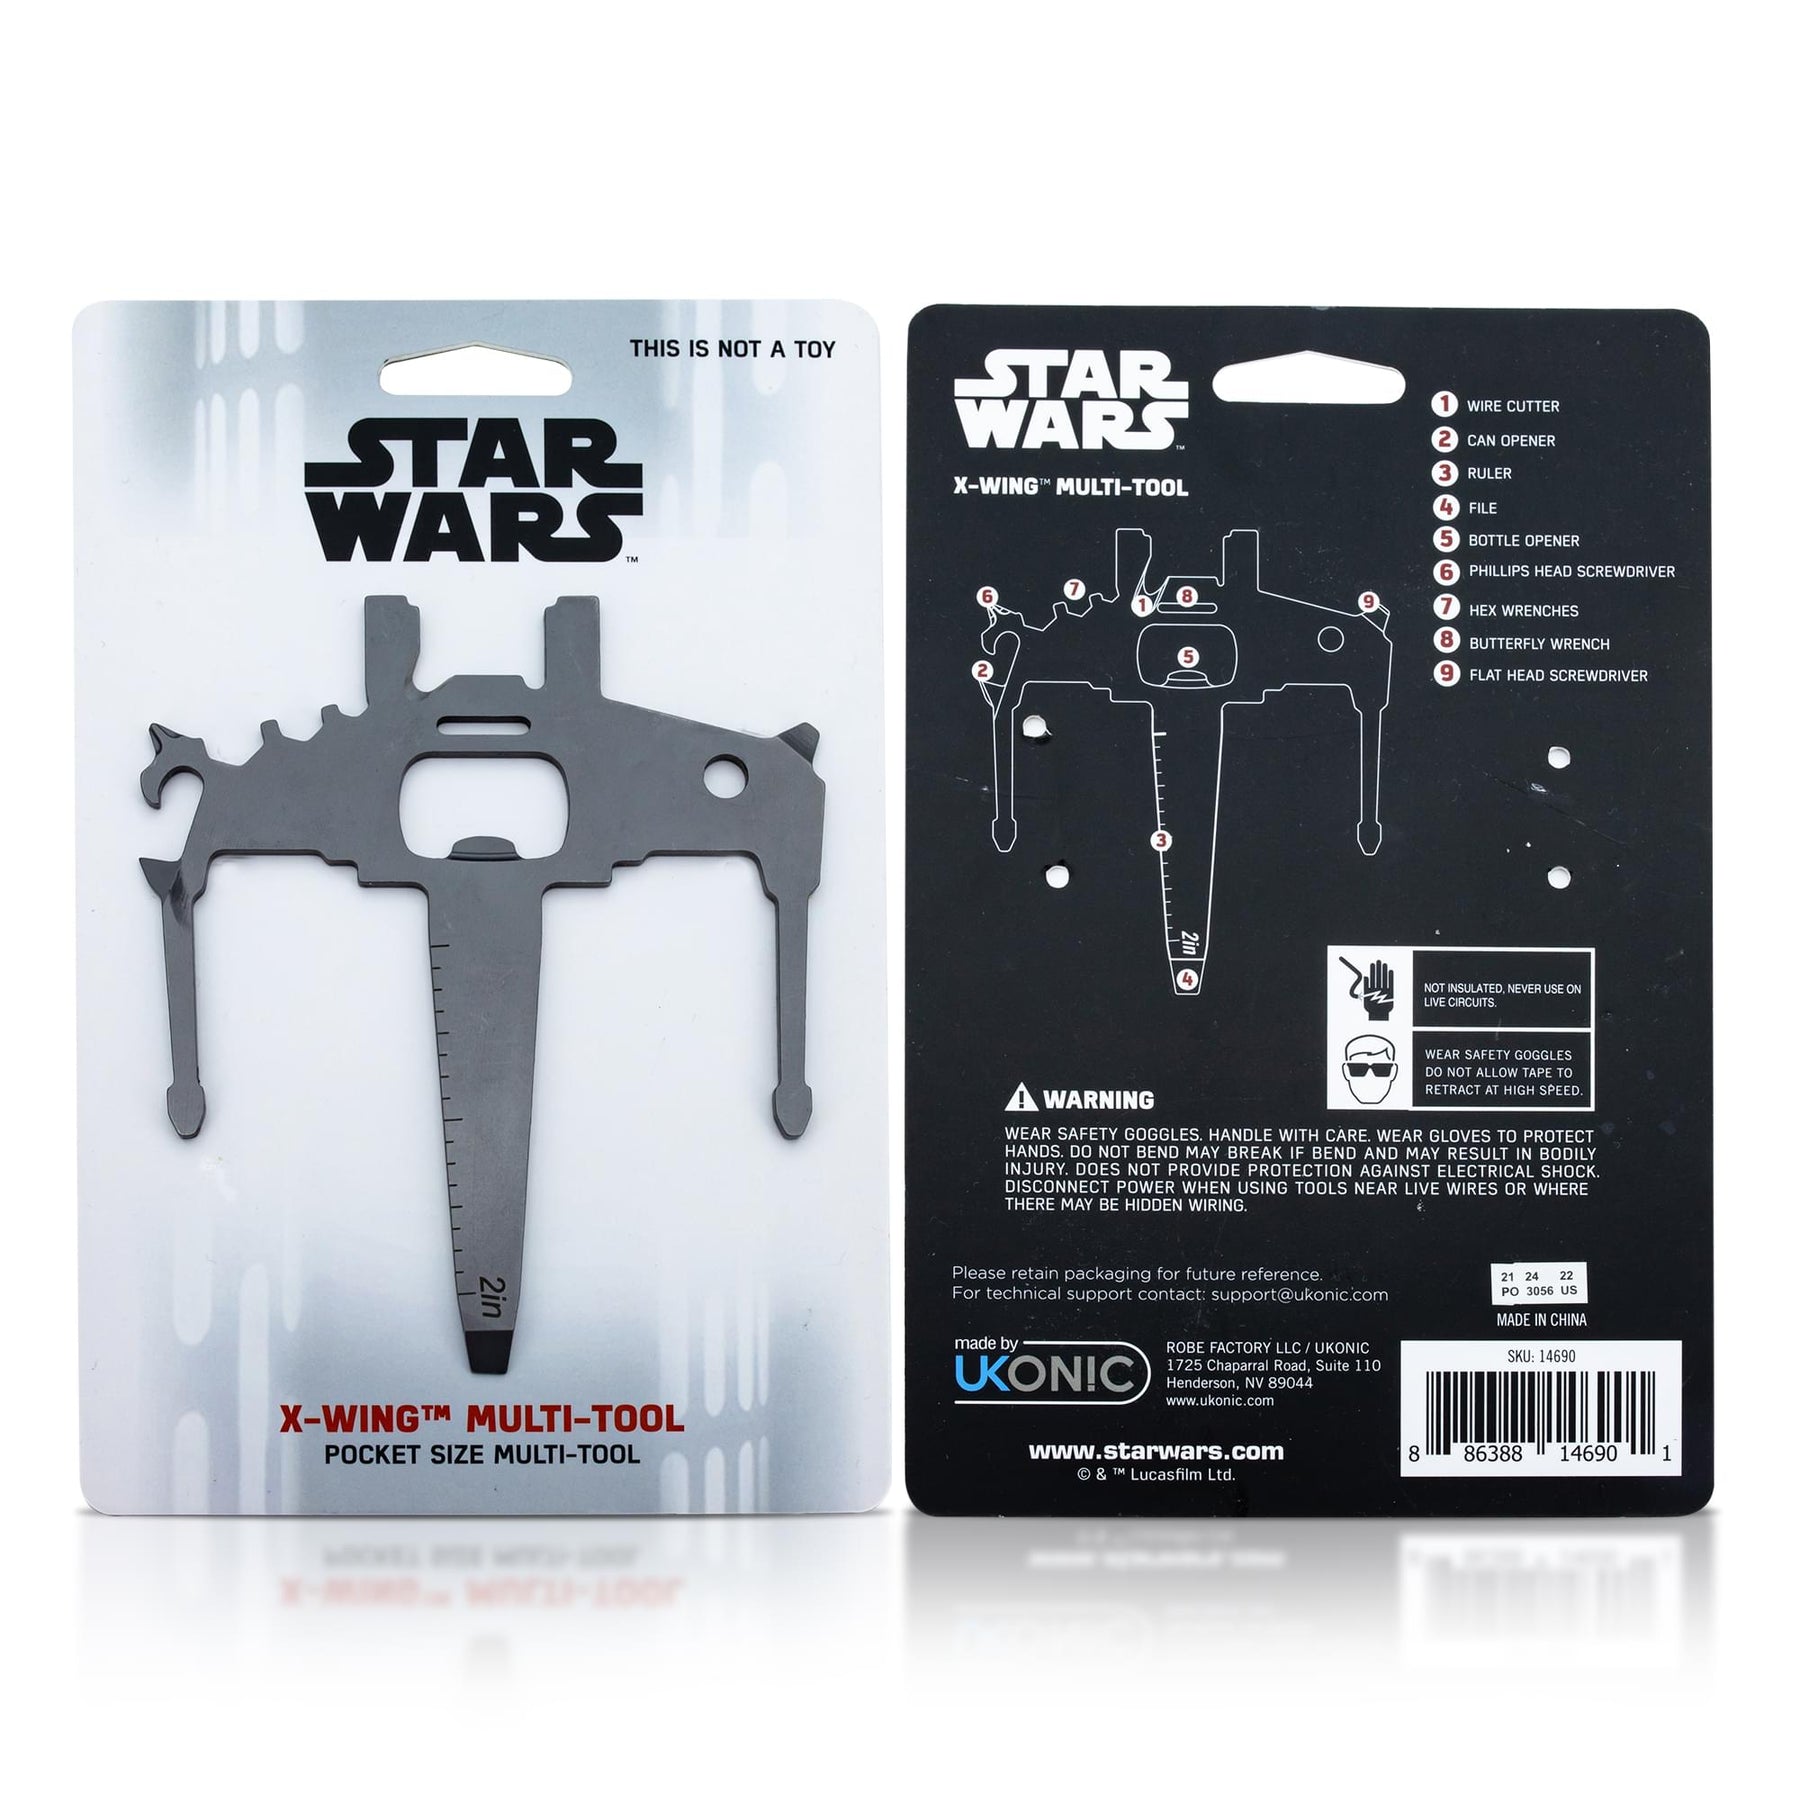 Star Wars X-Wing Pocket Size 9-In-1 Portable Multitool Kit